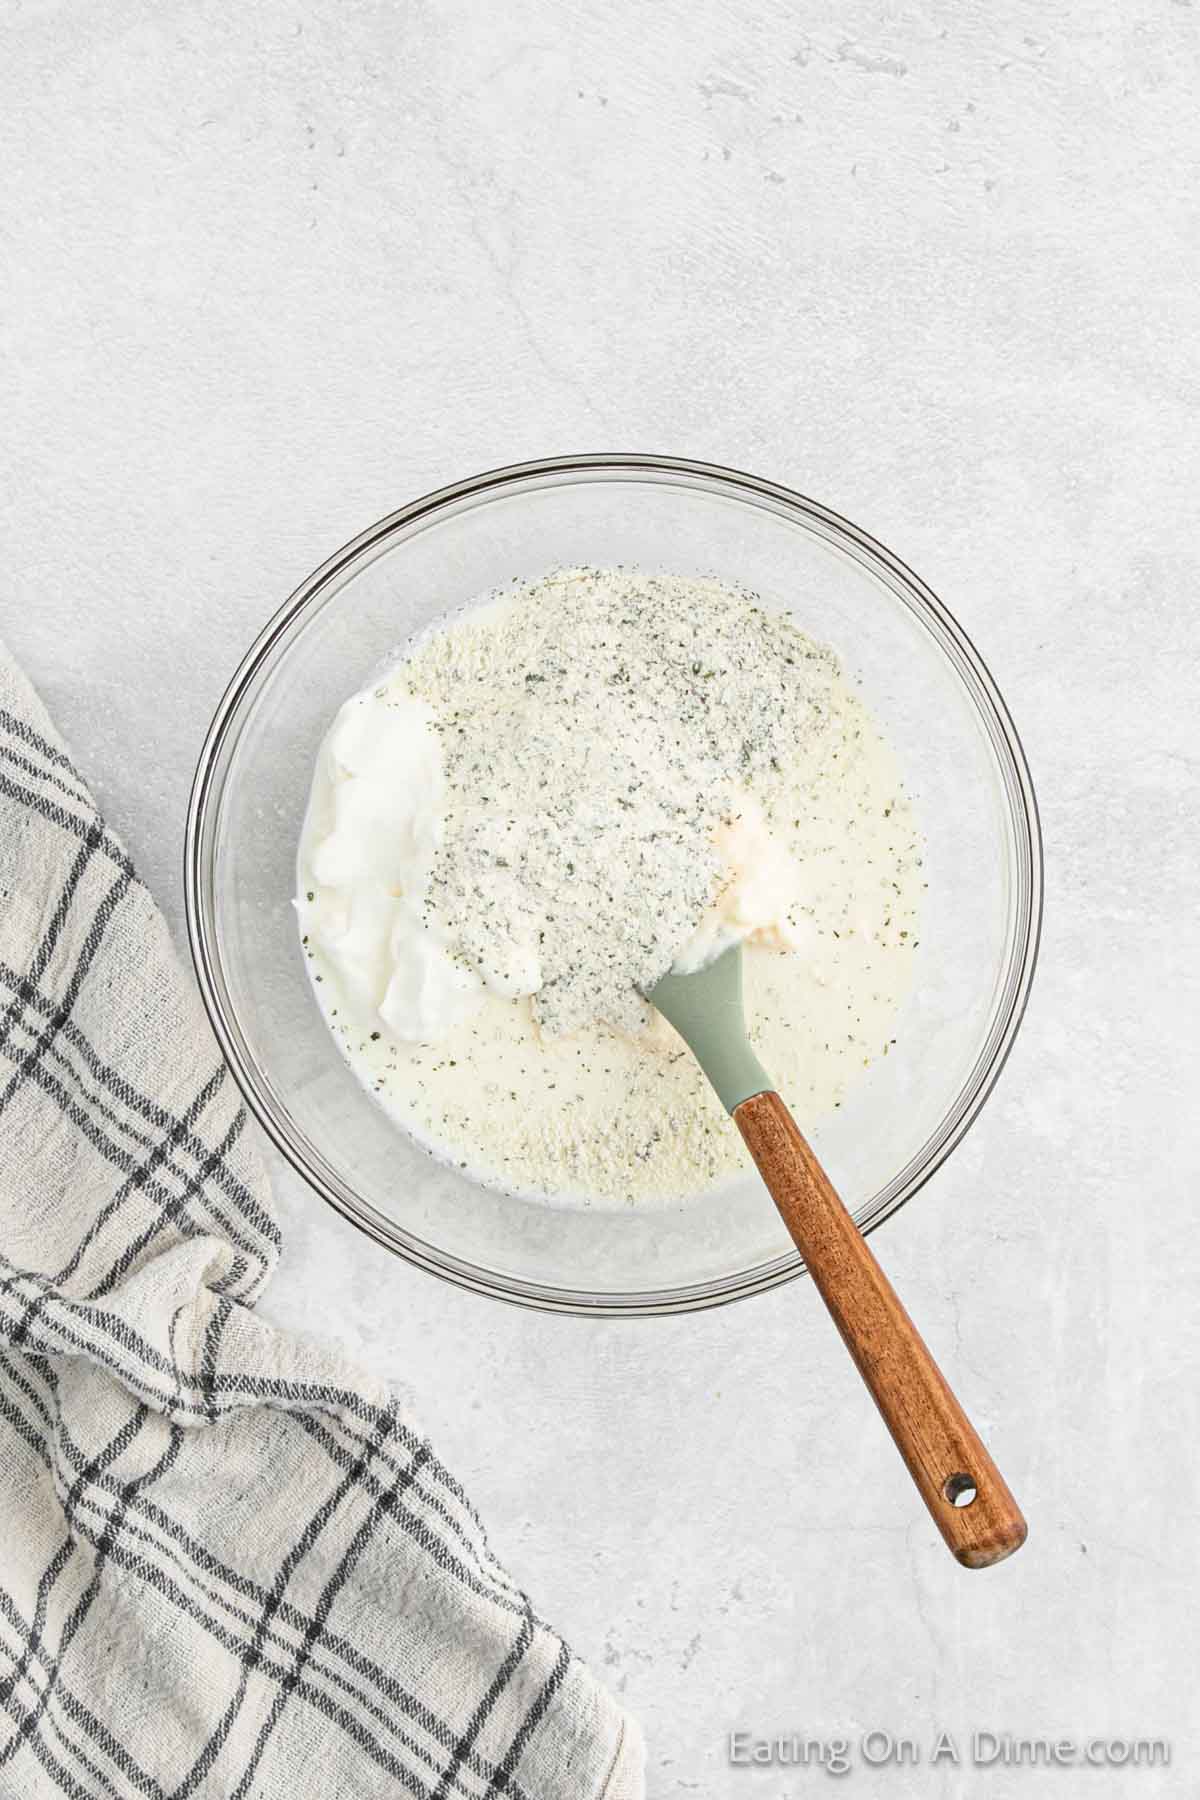 Combining the ranch dressing ingredients in a bowl with a wooden spoon